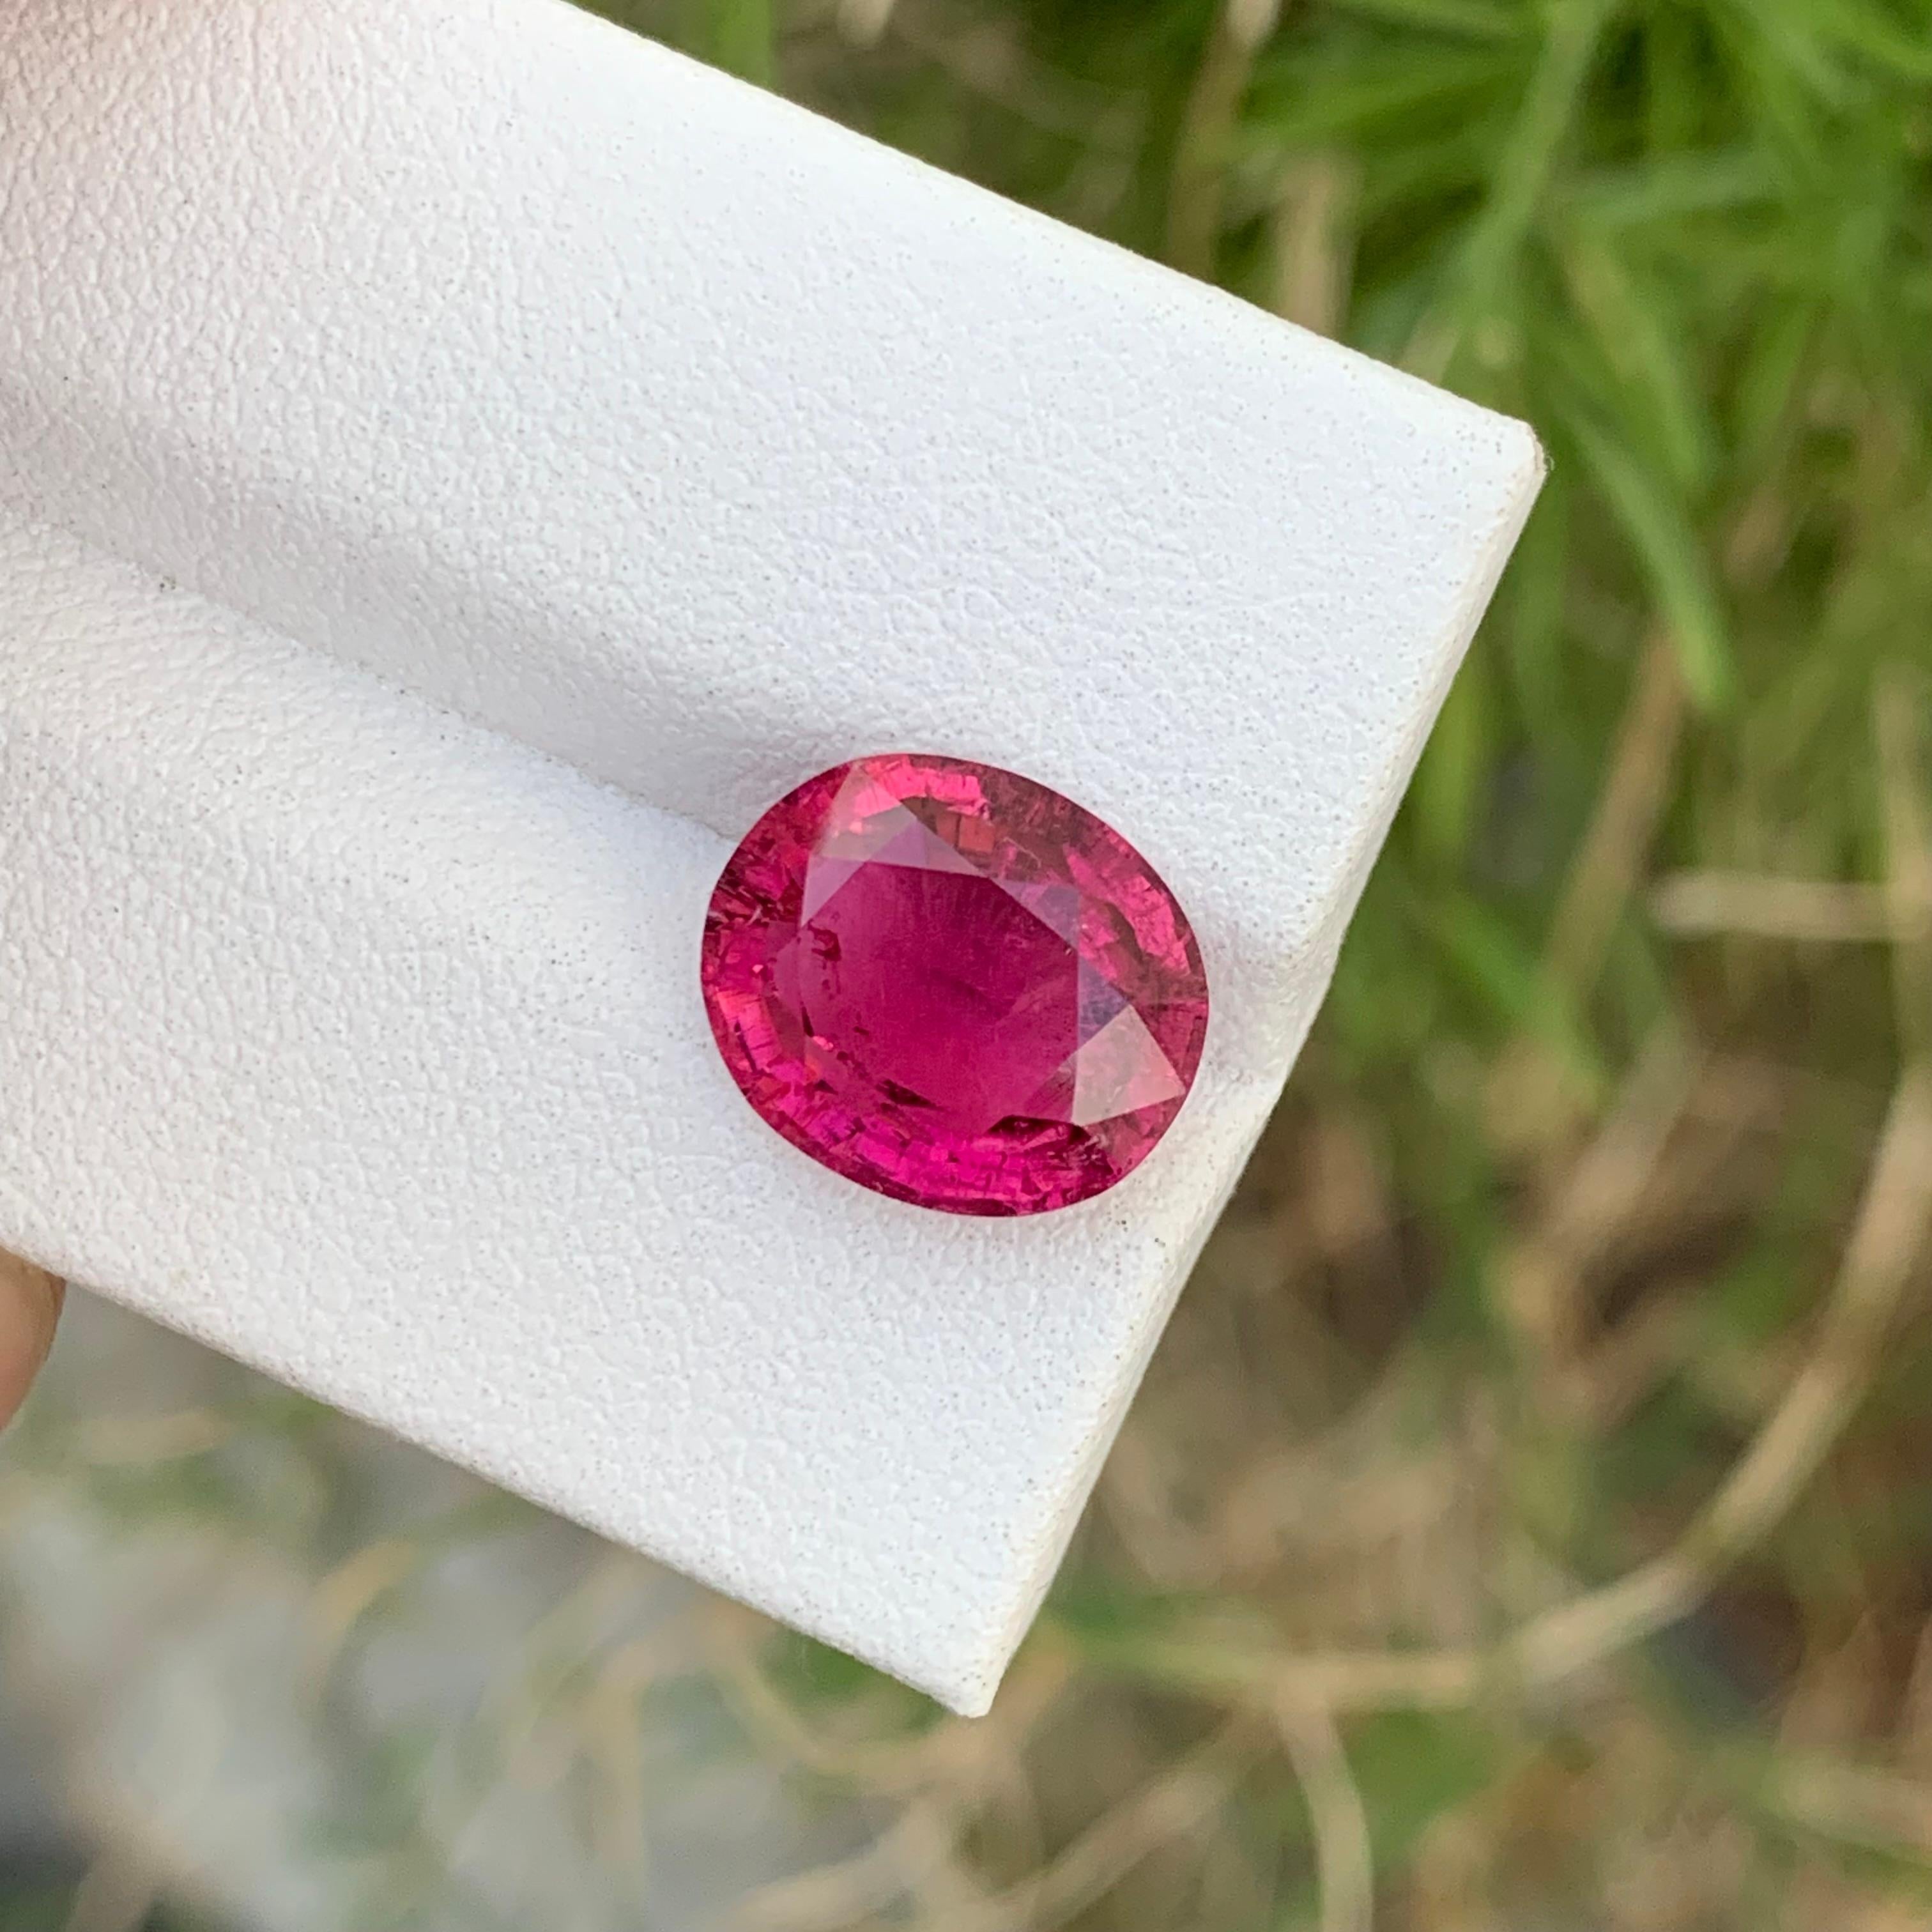 Loose Rubellite Tourmaline

Weight: 4.70 Carats
Dimension: 11.8 x 10 x 5.9 Mm
Origin: Afghanistan
Shape: Oval 
Color: Pink
Certificate: On Demand

Rubellite tourmaline, often regarded as the 